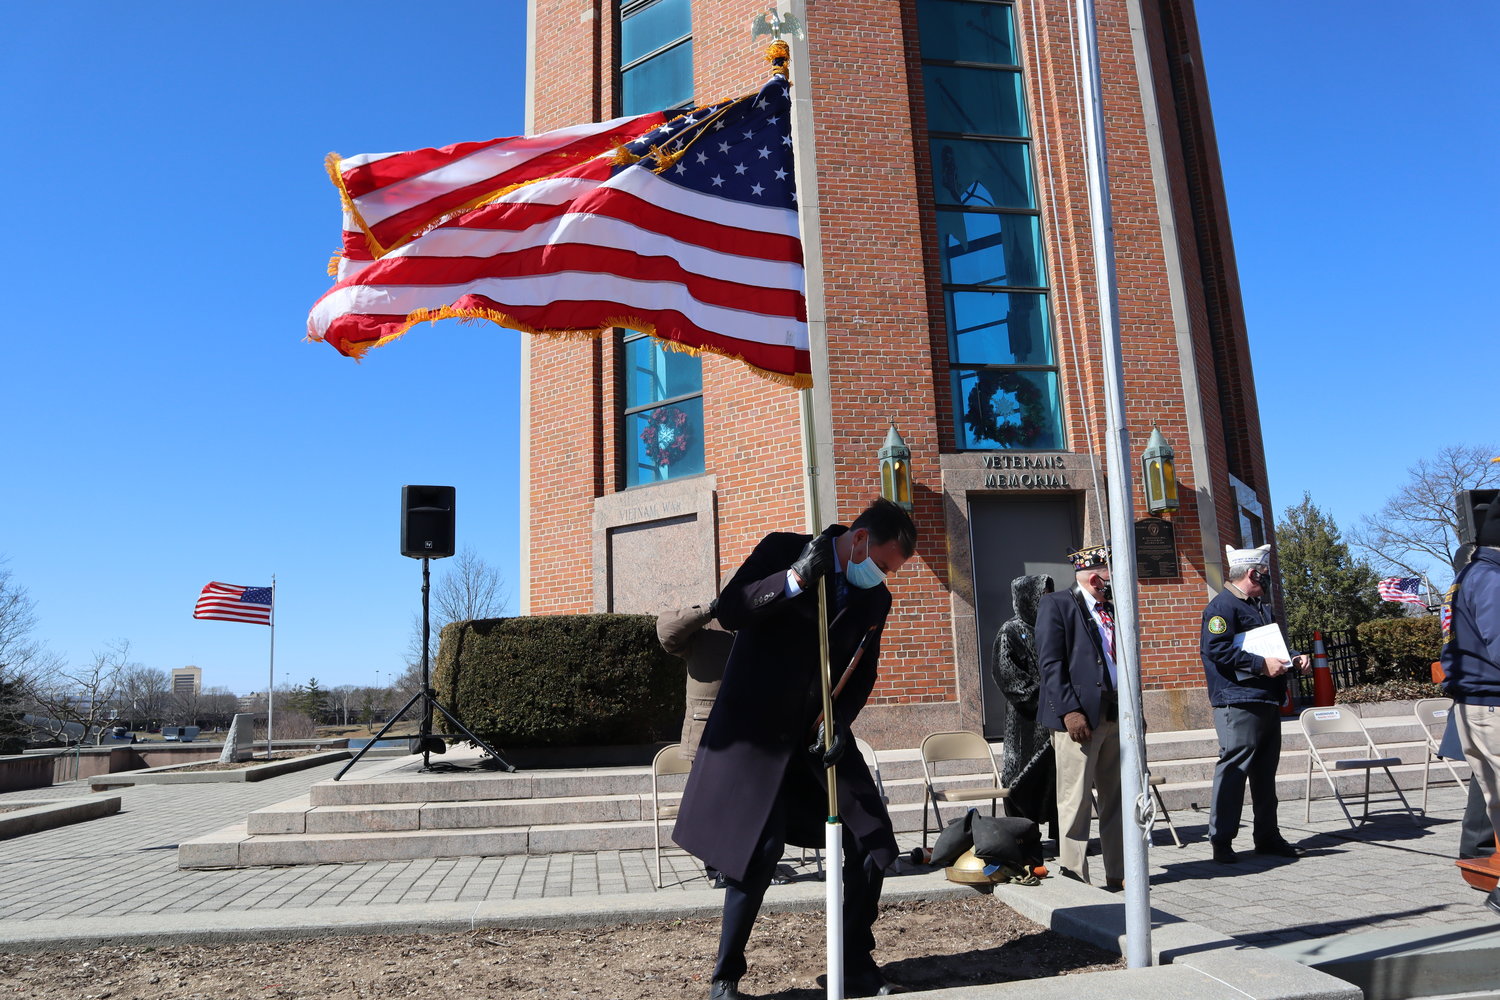 U.S. Rep. Tom Suozzi helped stand the American Flag in the turbulent wind.